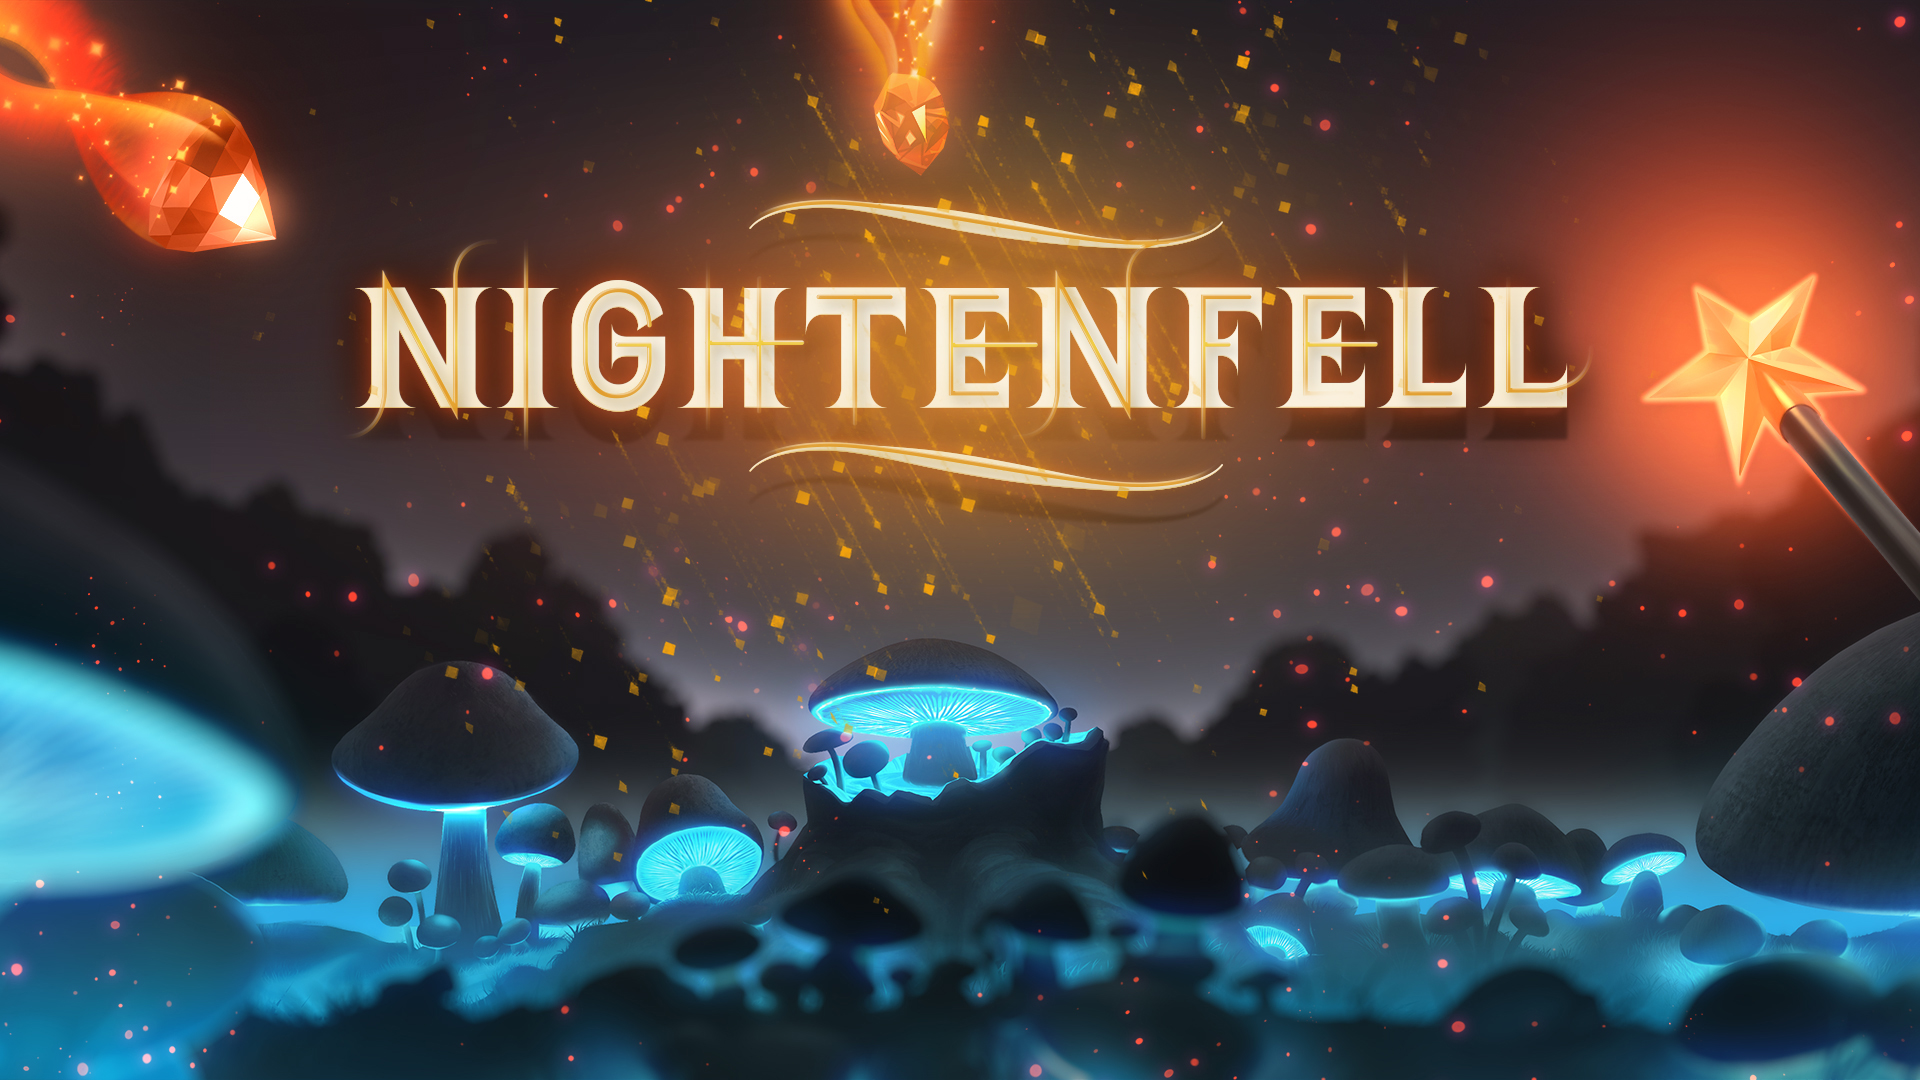 nightenfell-augmented-reality-game